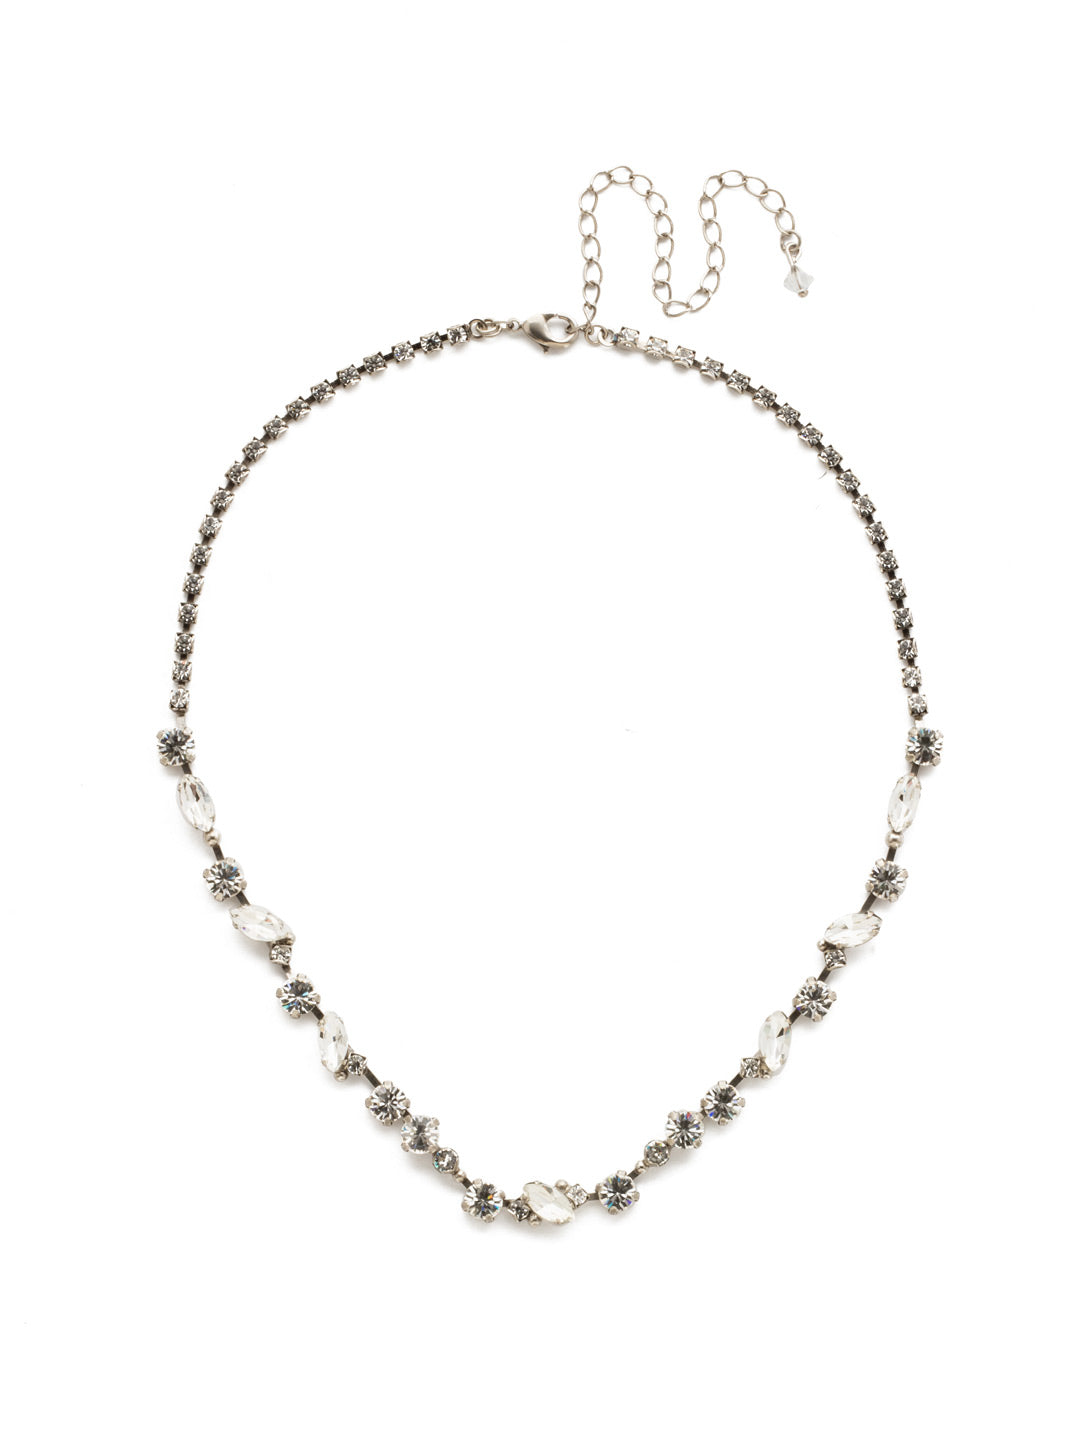 Simply Stated Tennis Necklace - NDN1ASCRY